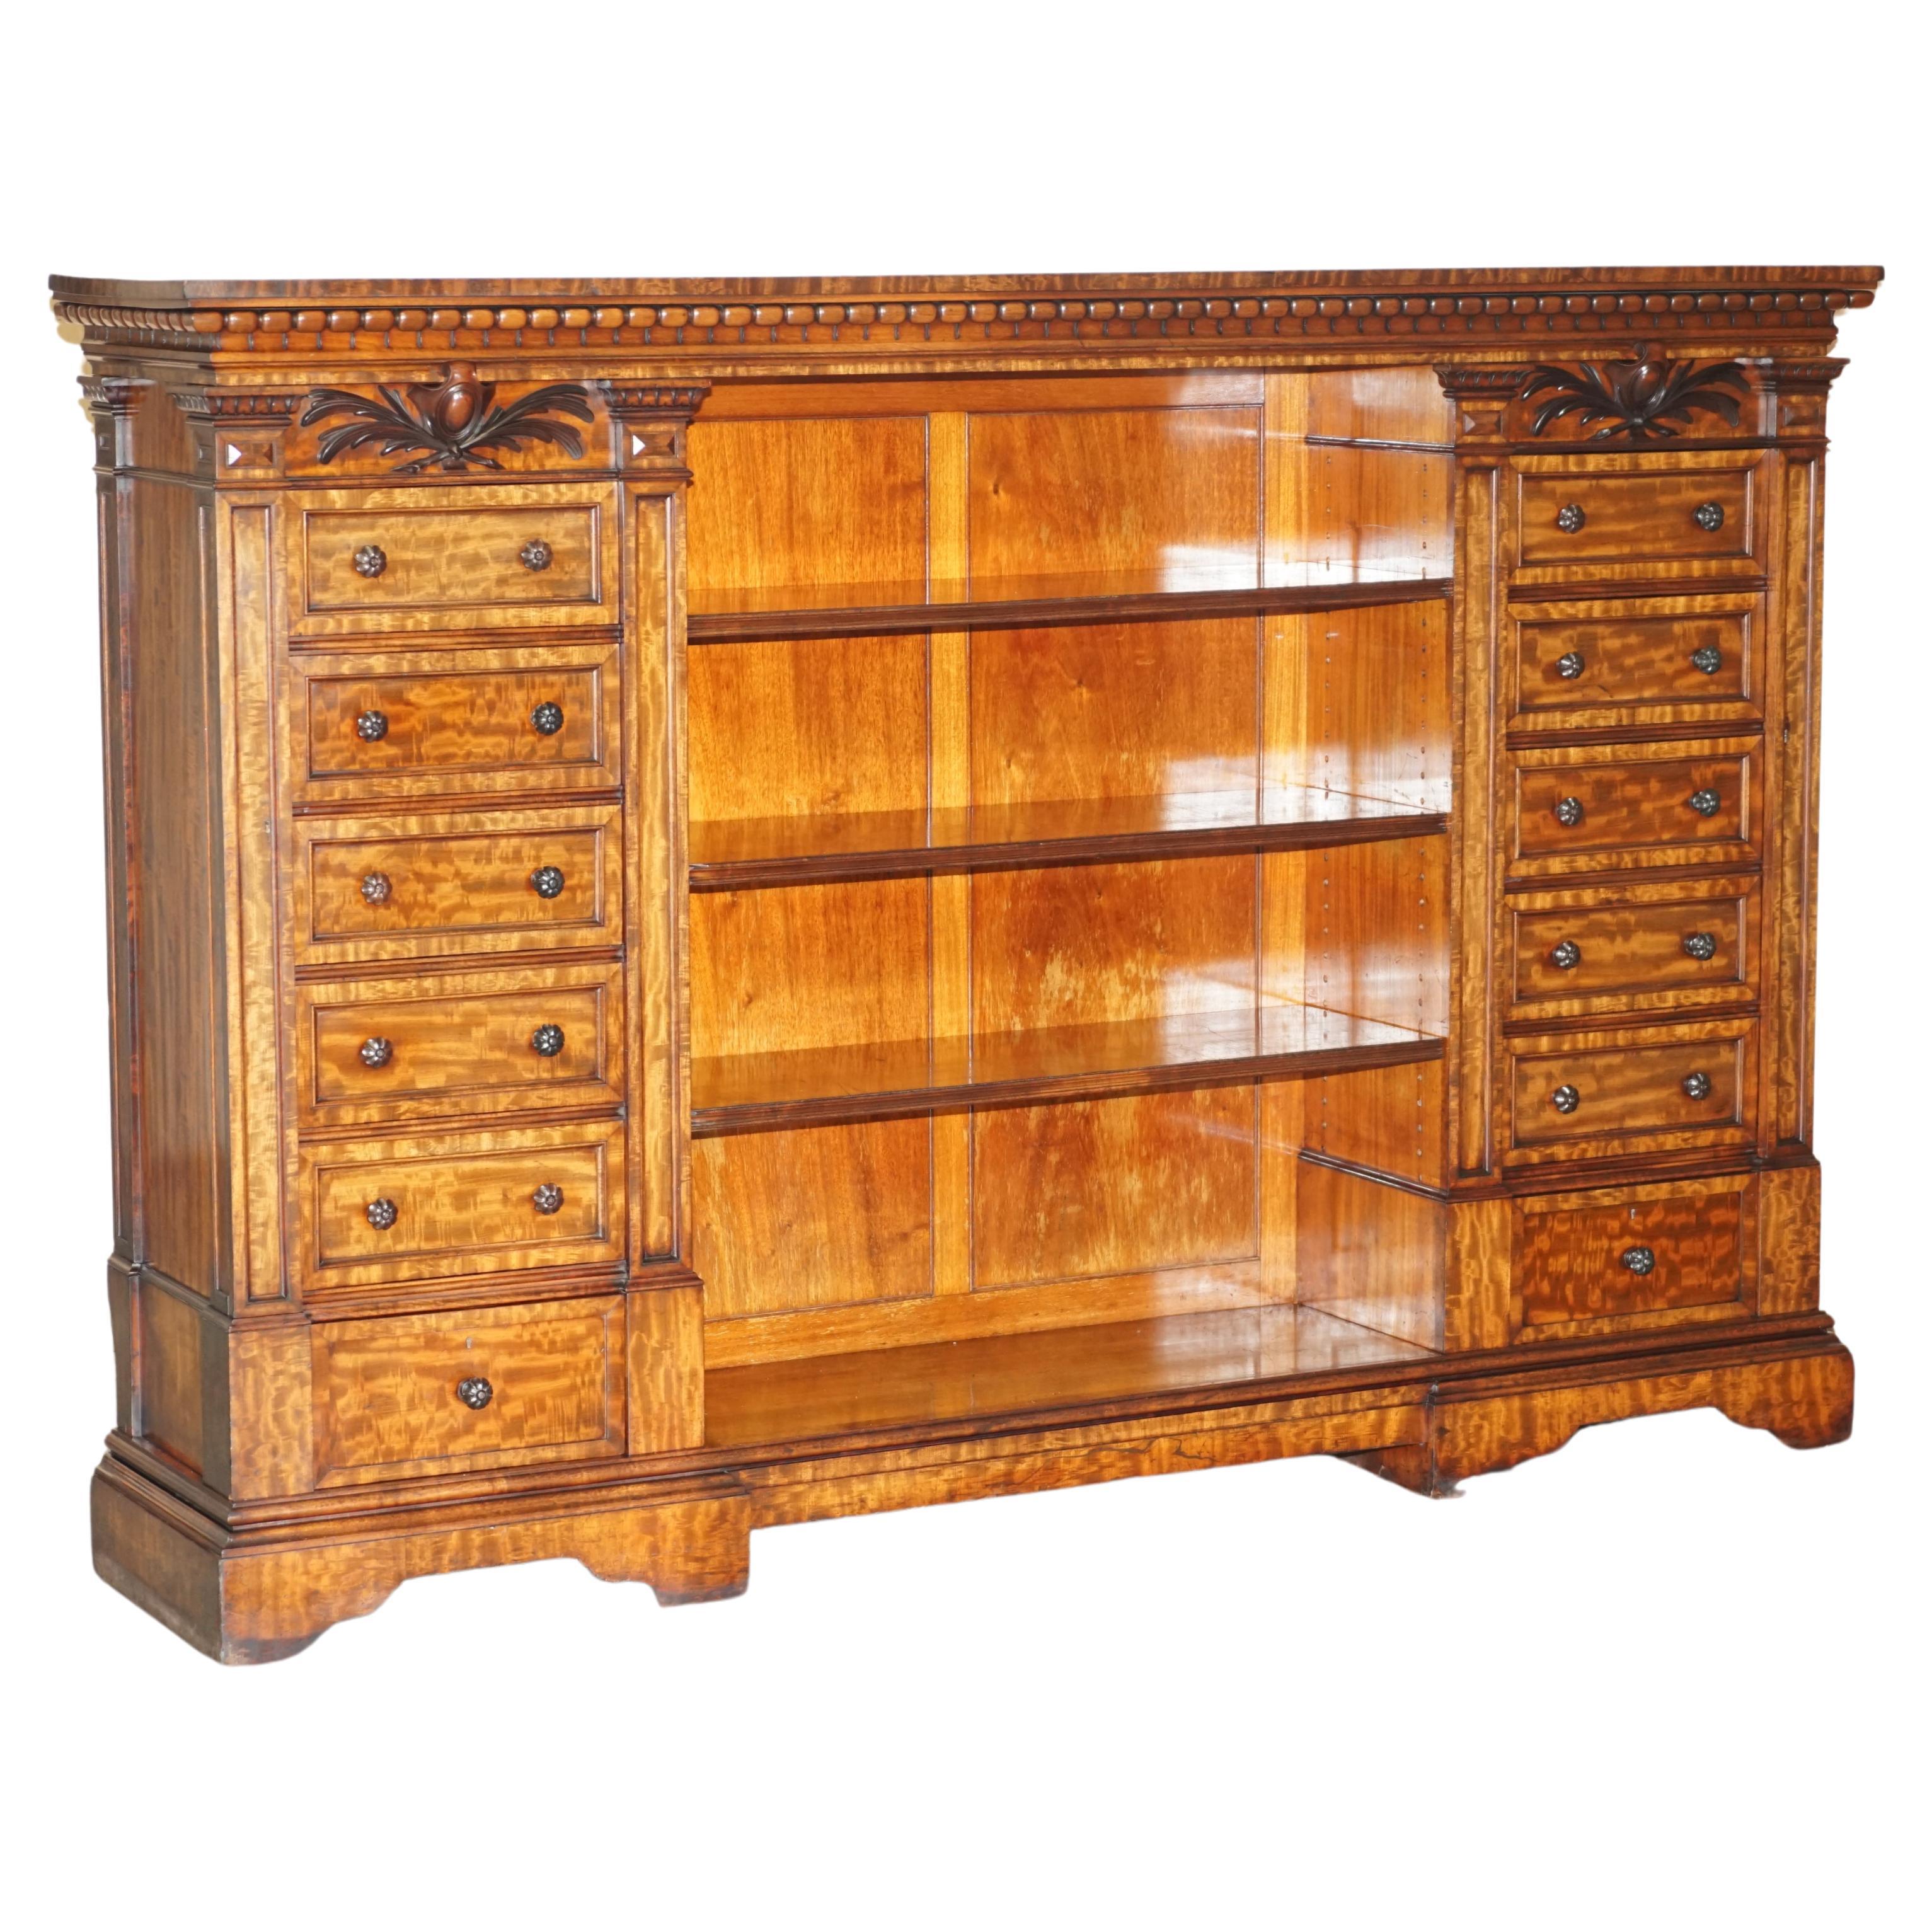 Finest Quality Antique 1830 Flamed Hardwood Wellington Chest of Drawers Bookcase